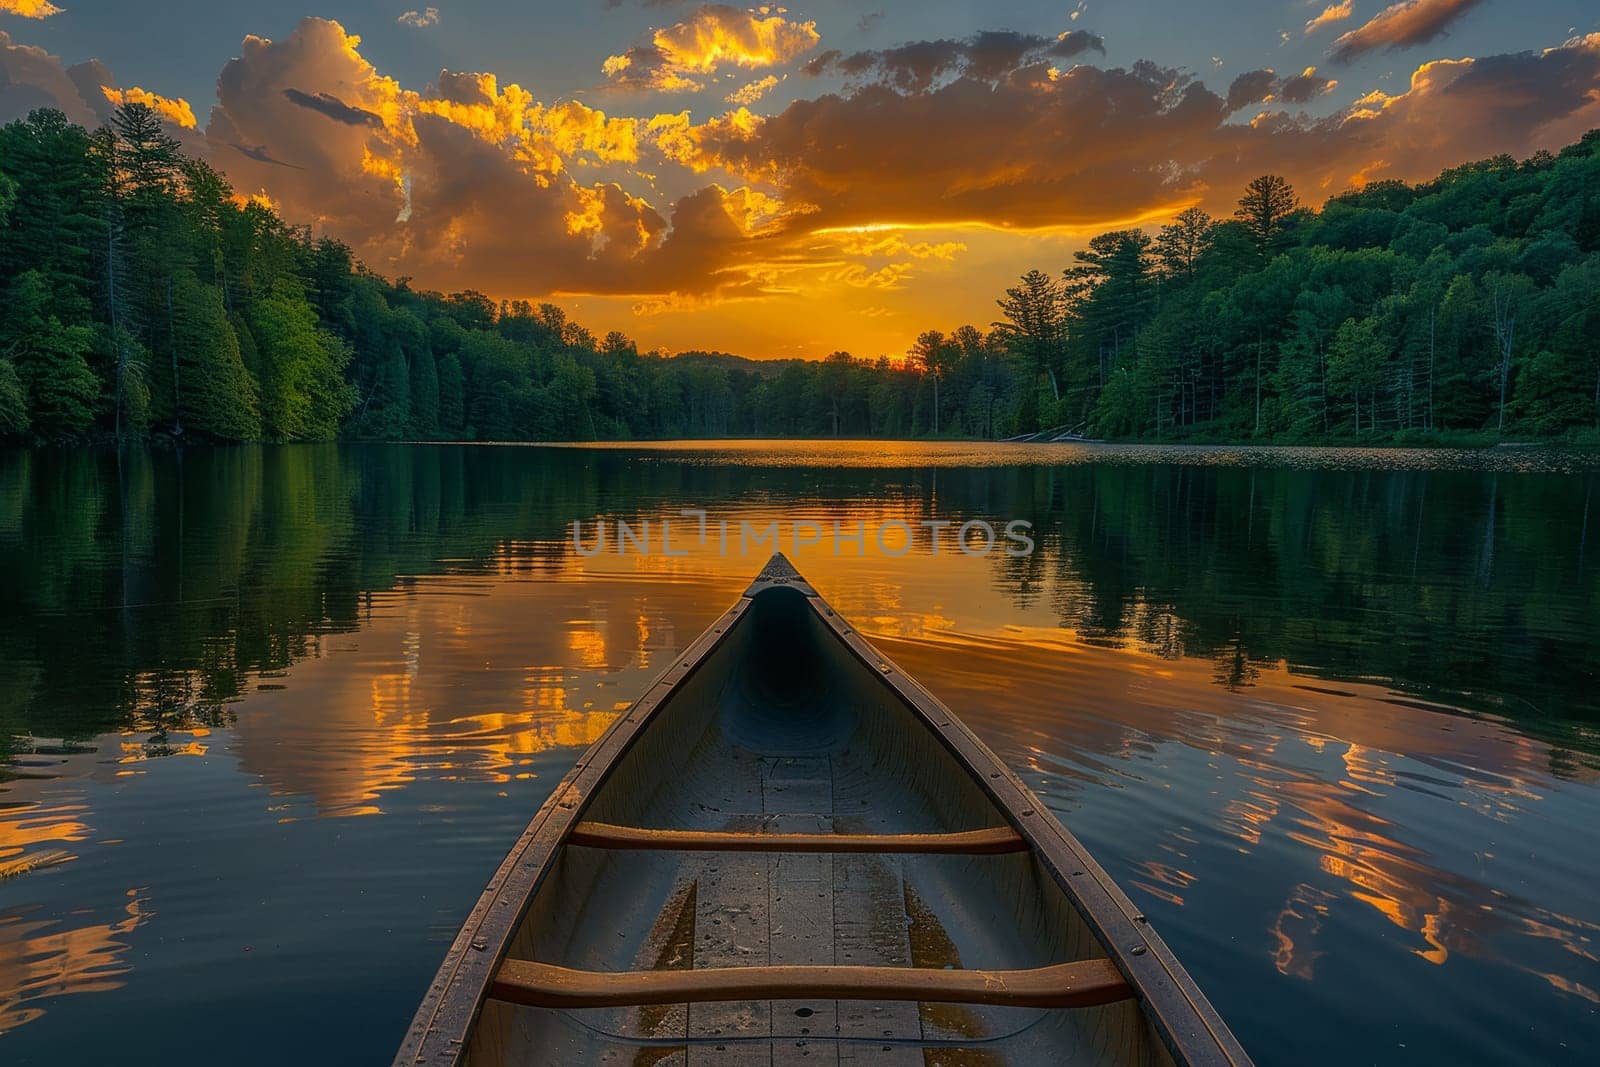 A canoe is floating on a lake at sunset. The sky is orange and the water is calm